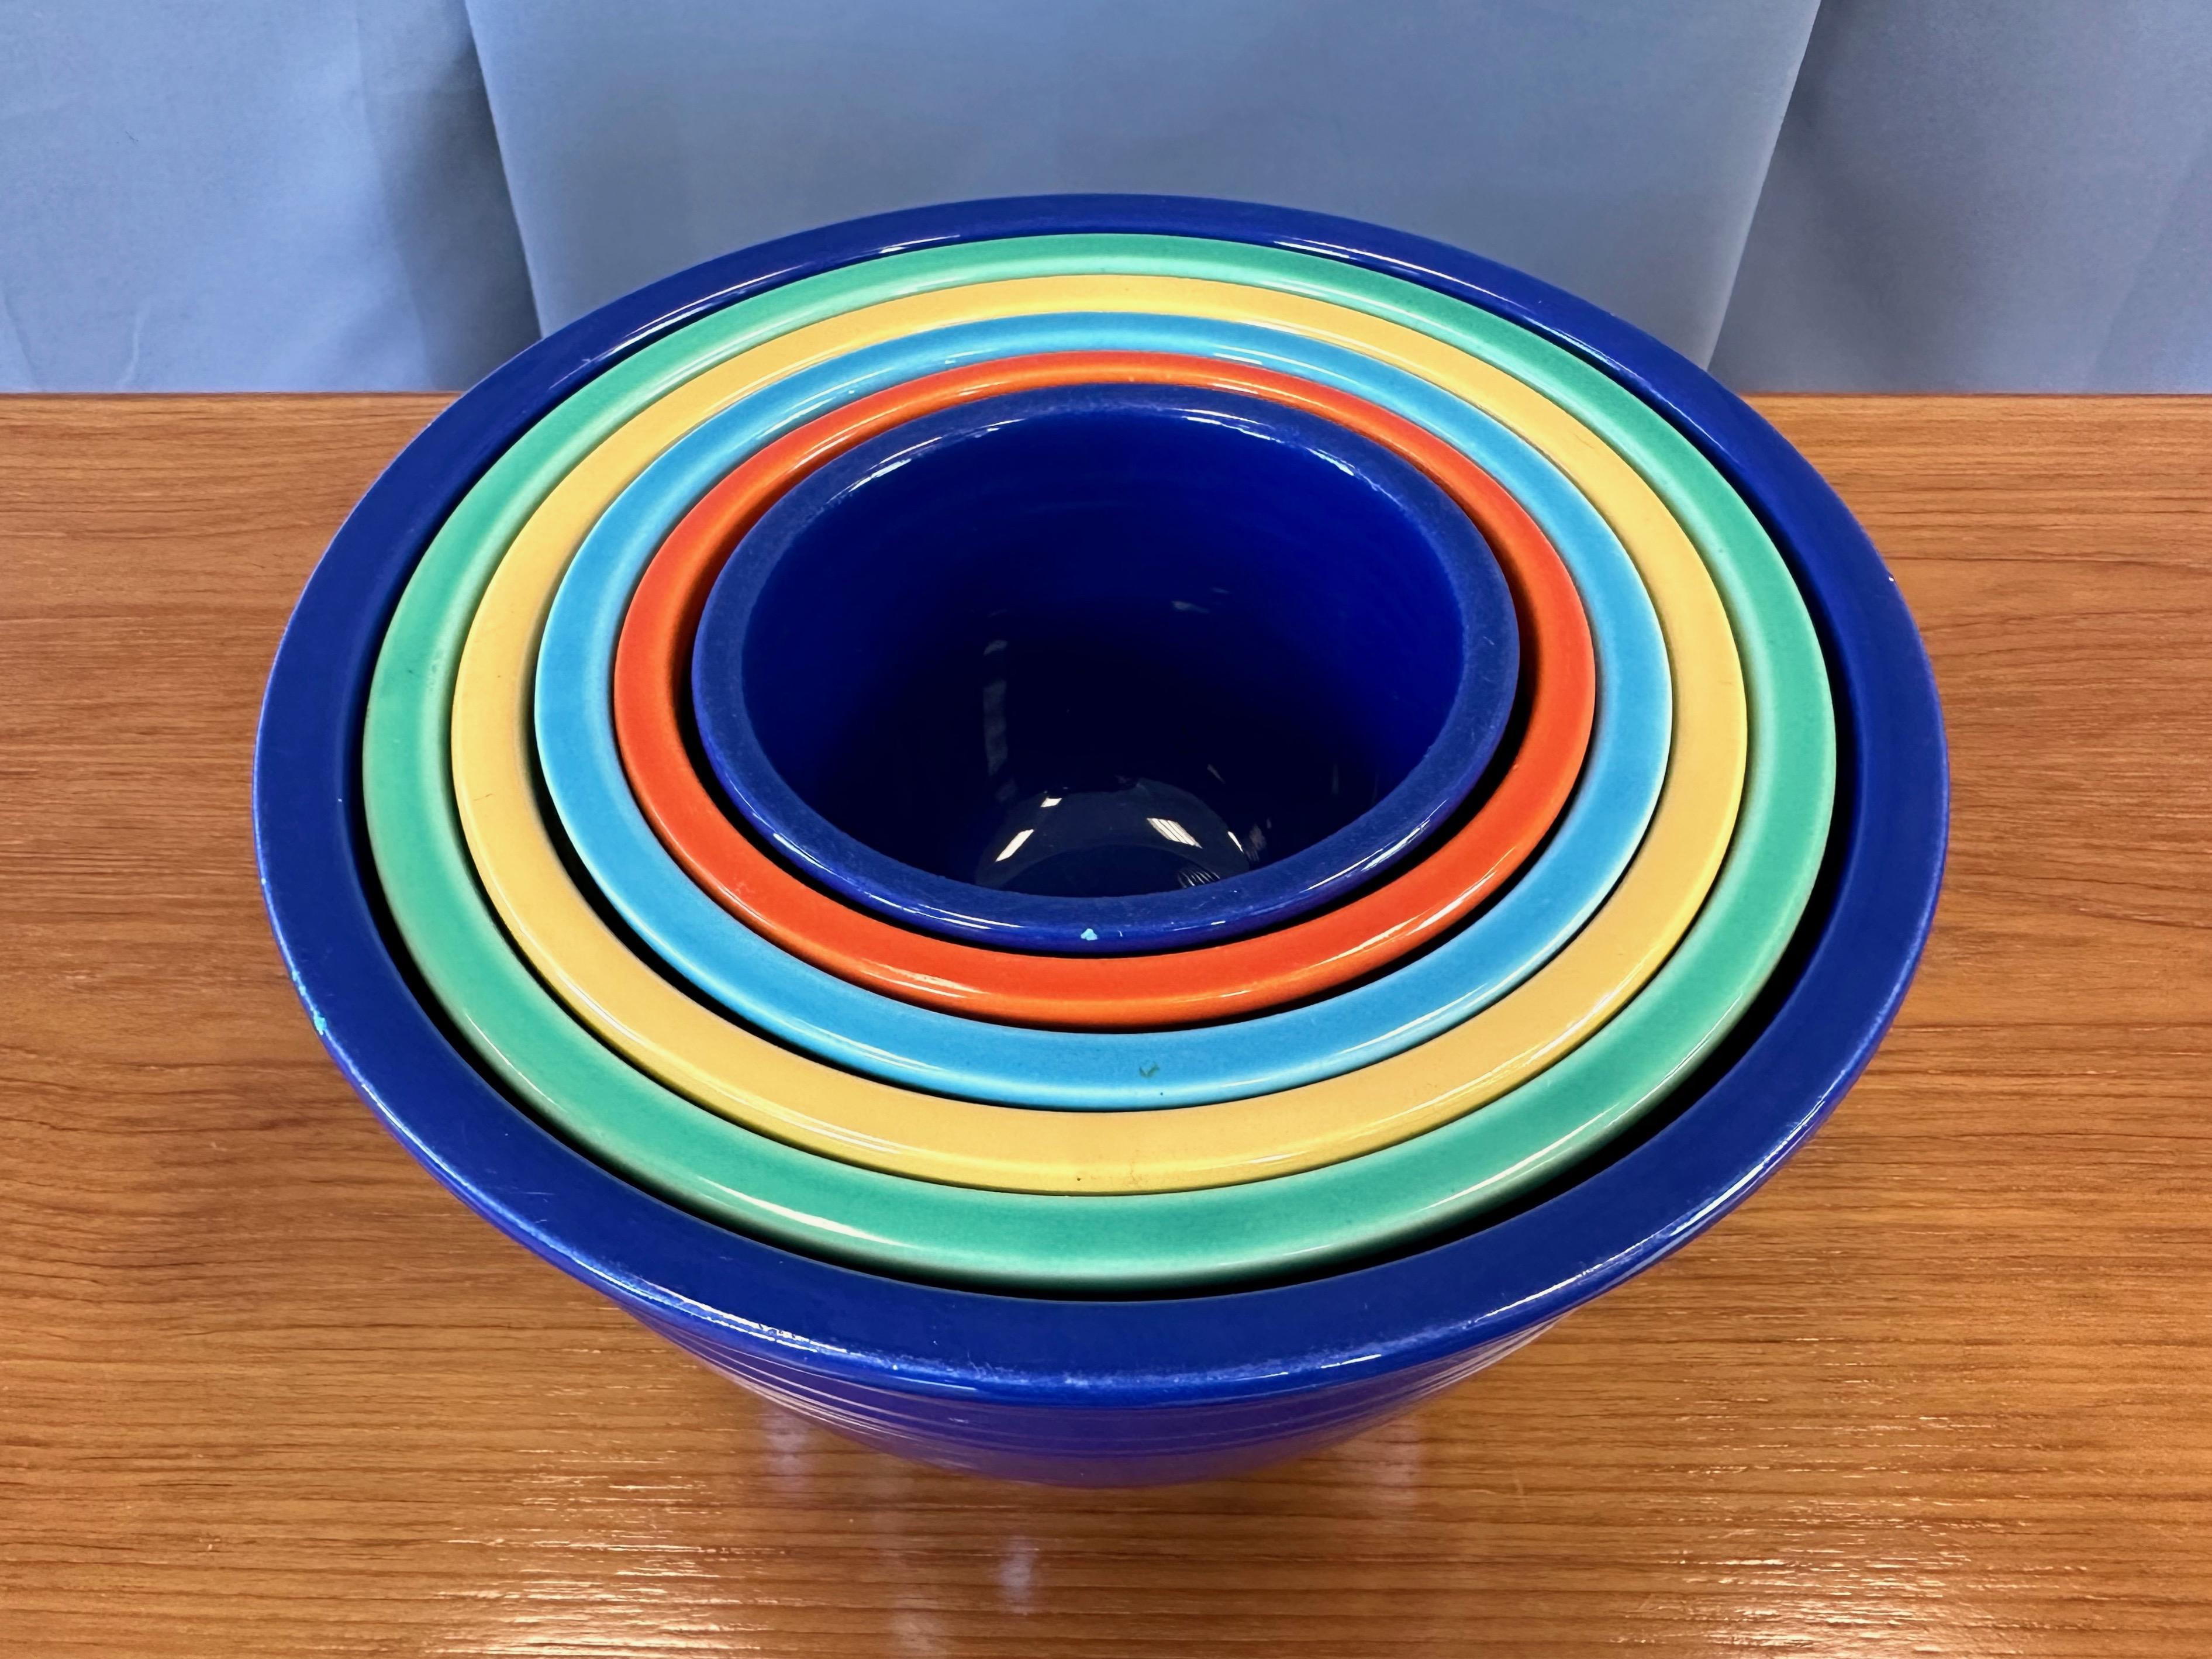 Ceramic Early Vintage Fiestaware Nesting Mixing Bowls, Multi-Color Set of Six, c. 1940